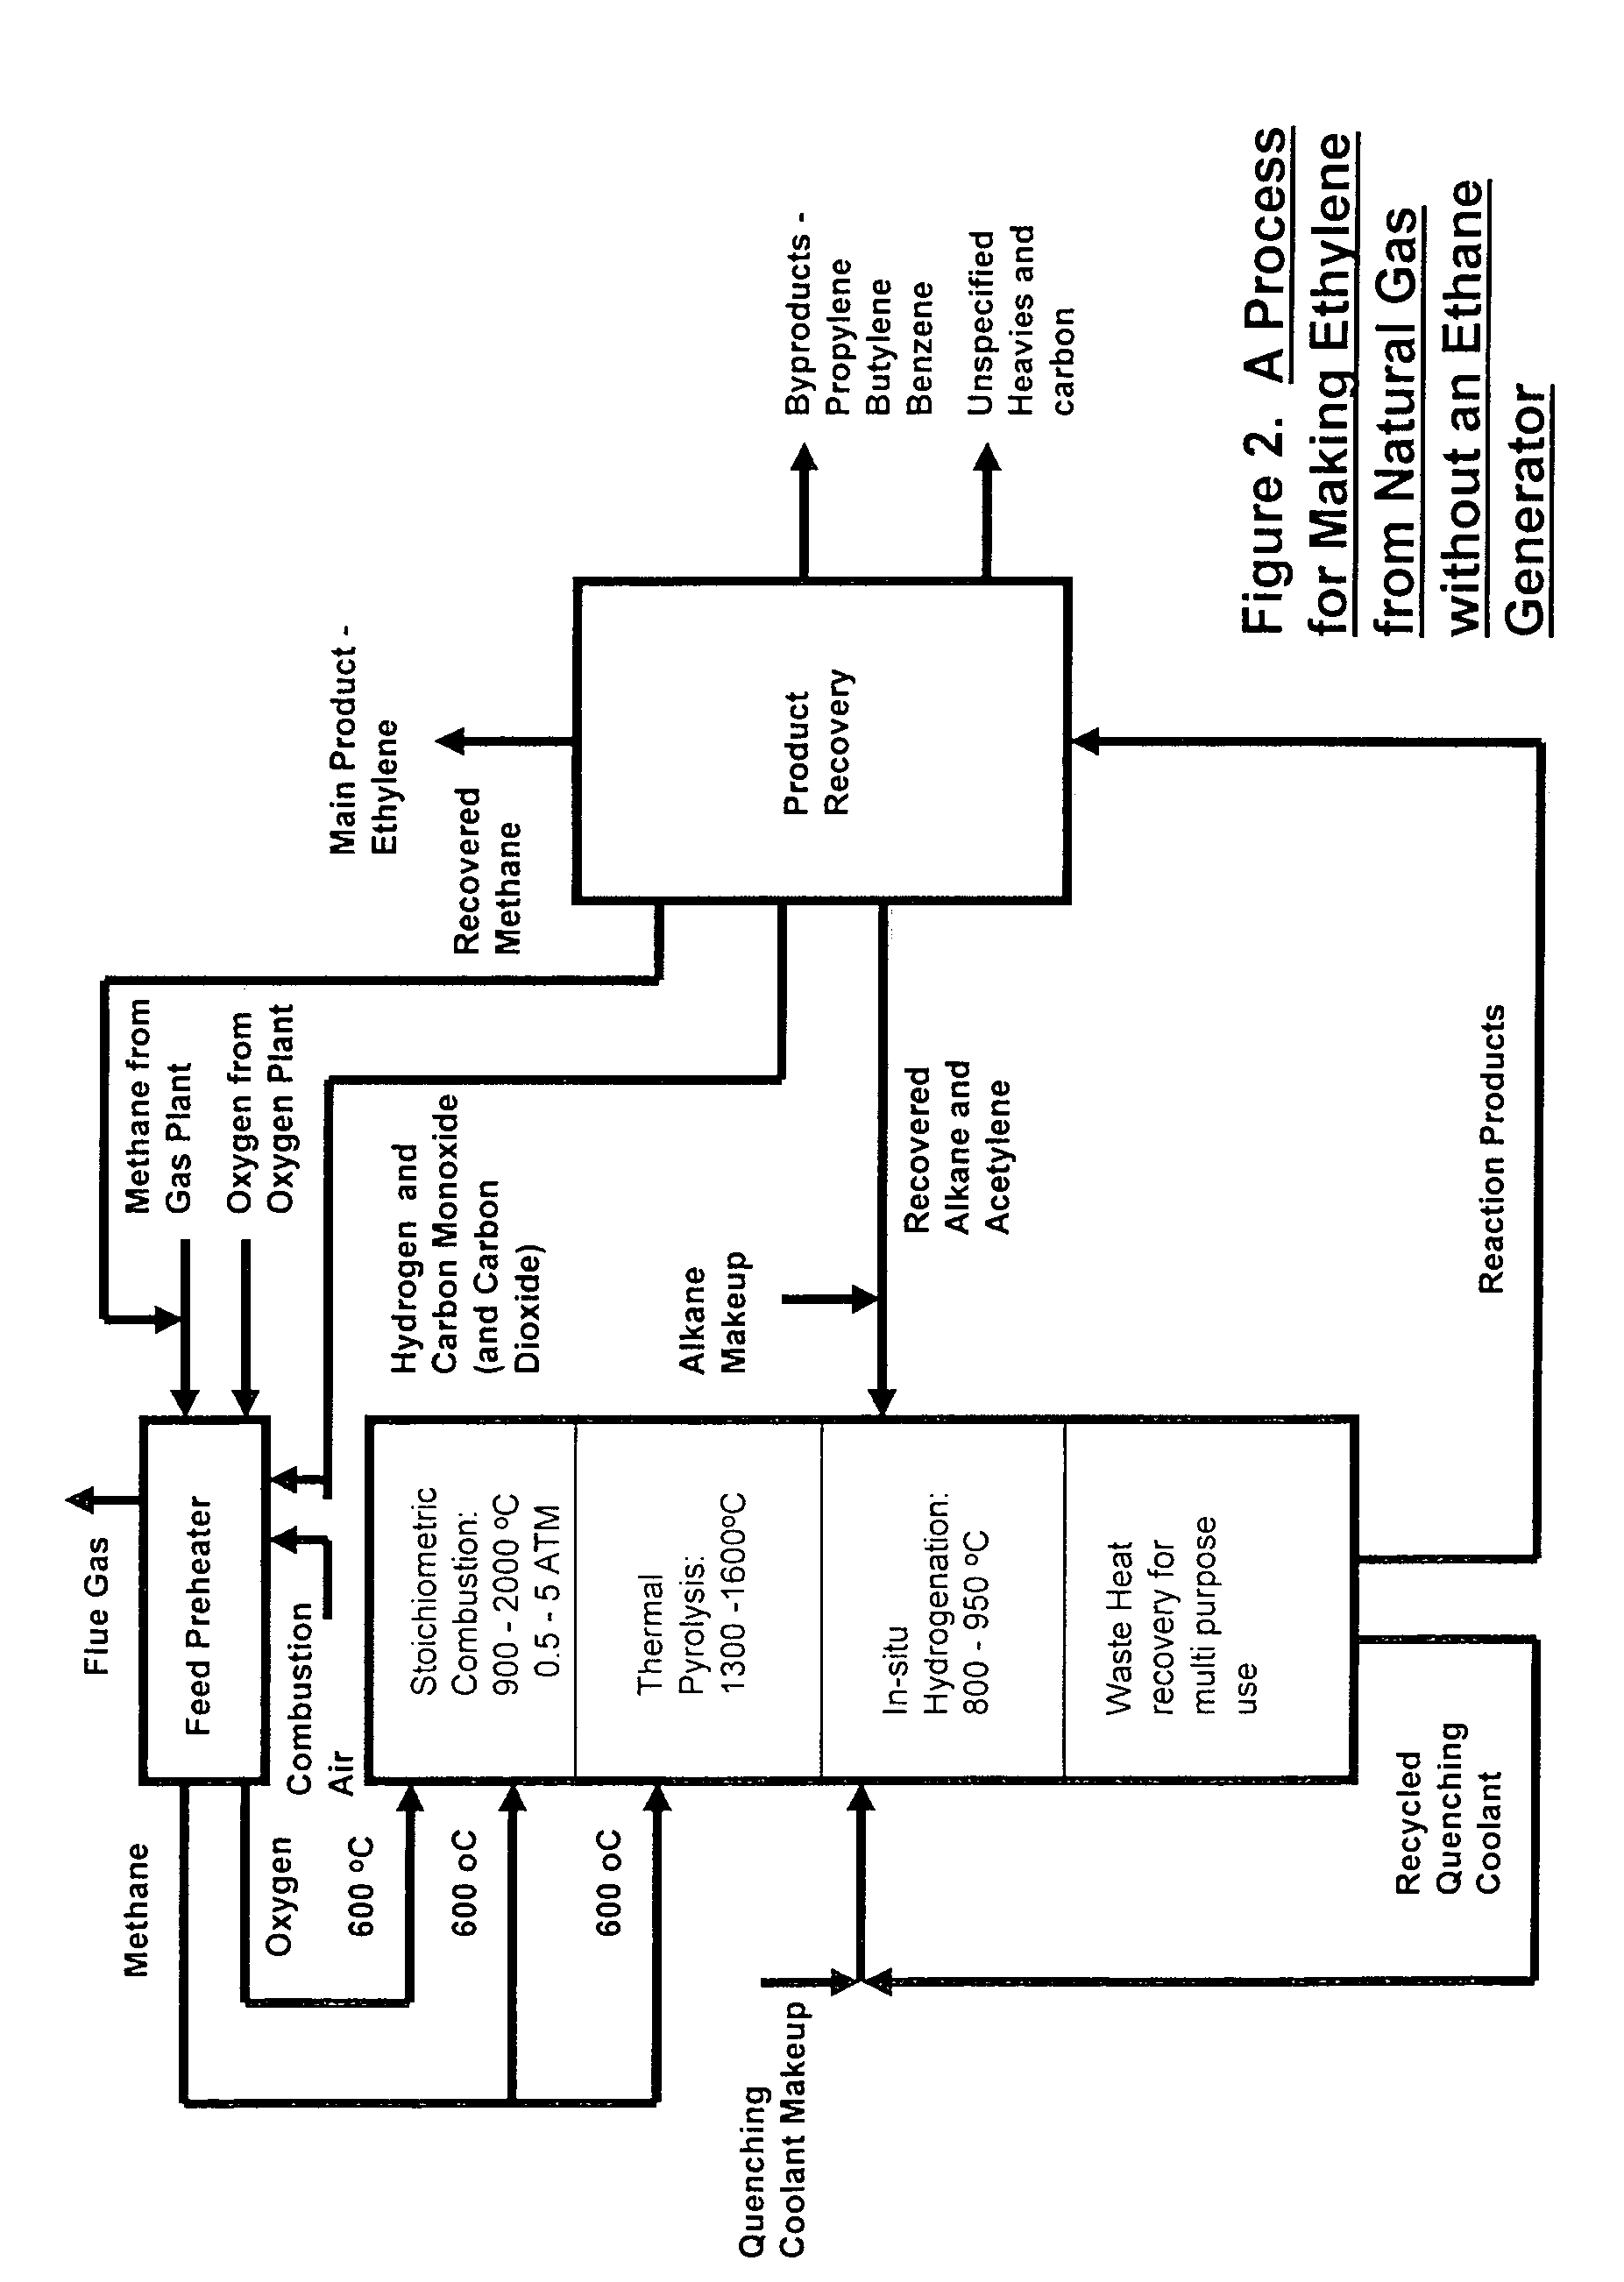 Process for the production of ethylene from natural gas with heat integration